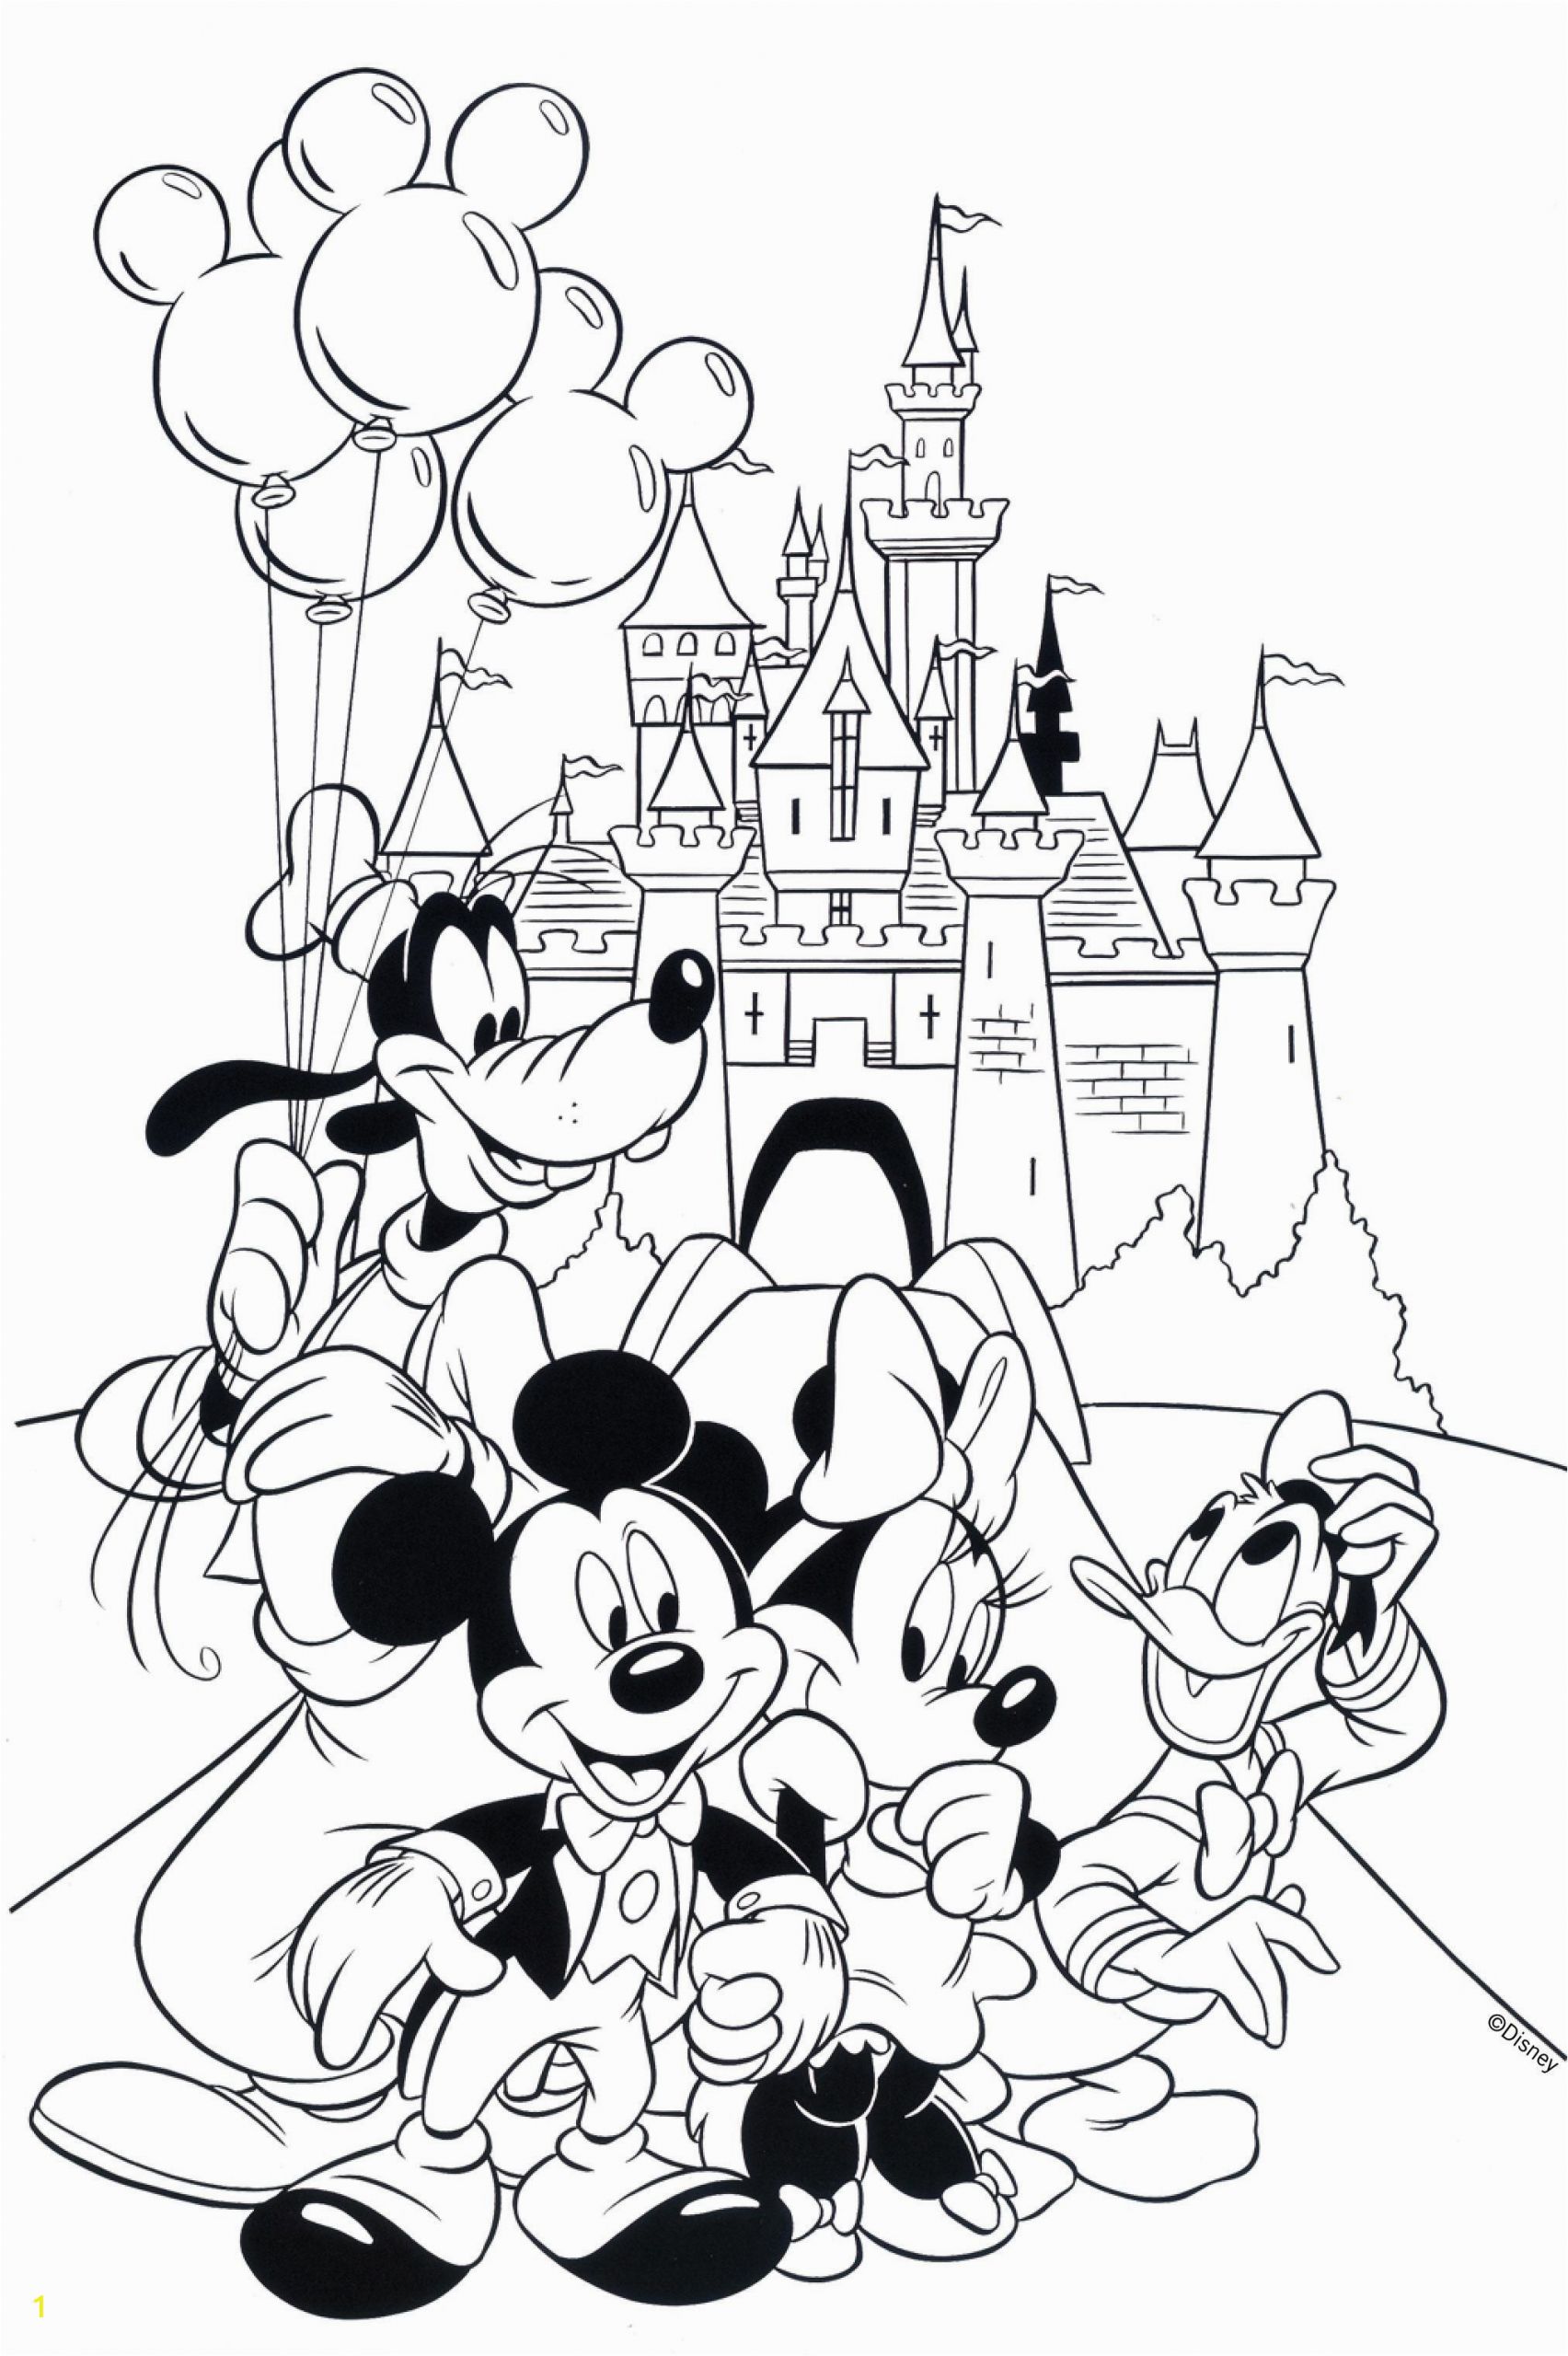 Minnie Mouse Coloring Pages Disney Free Children S Colouring In Ð² 2020 Ð³ Ñ